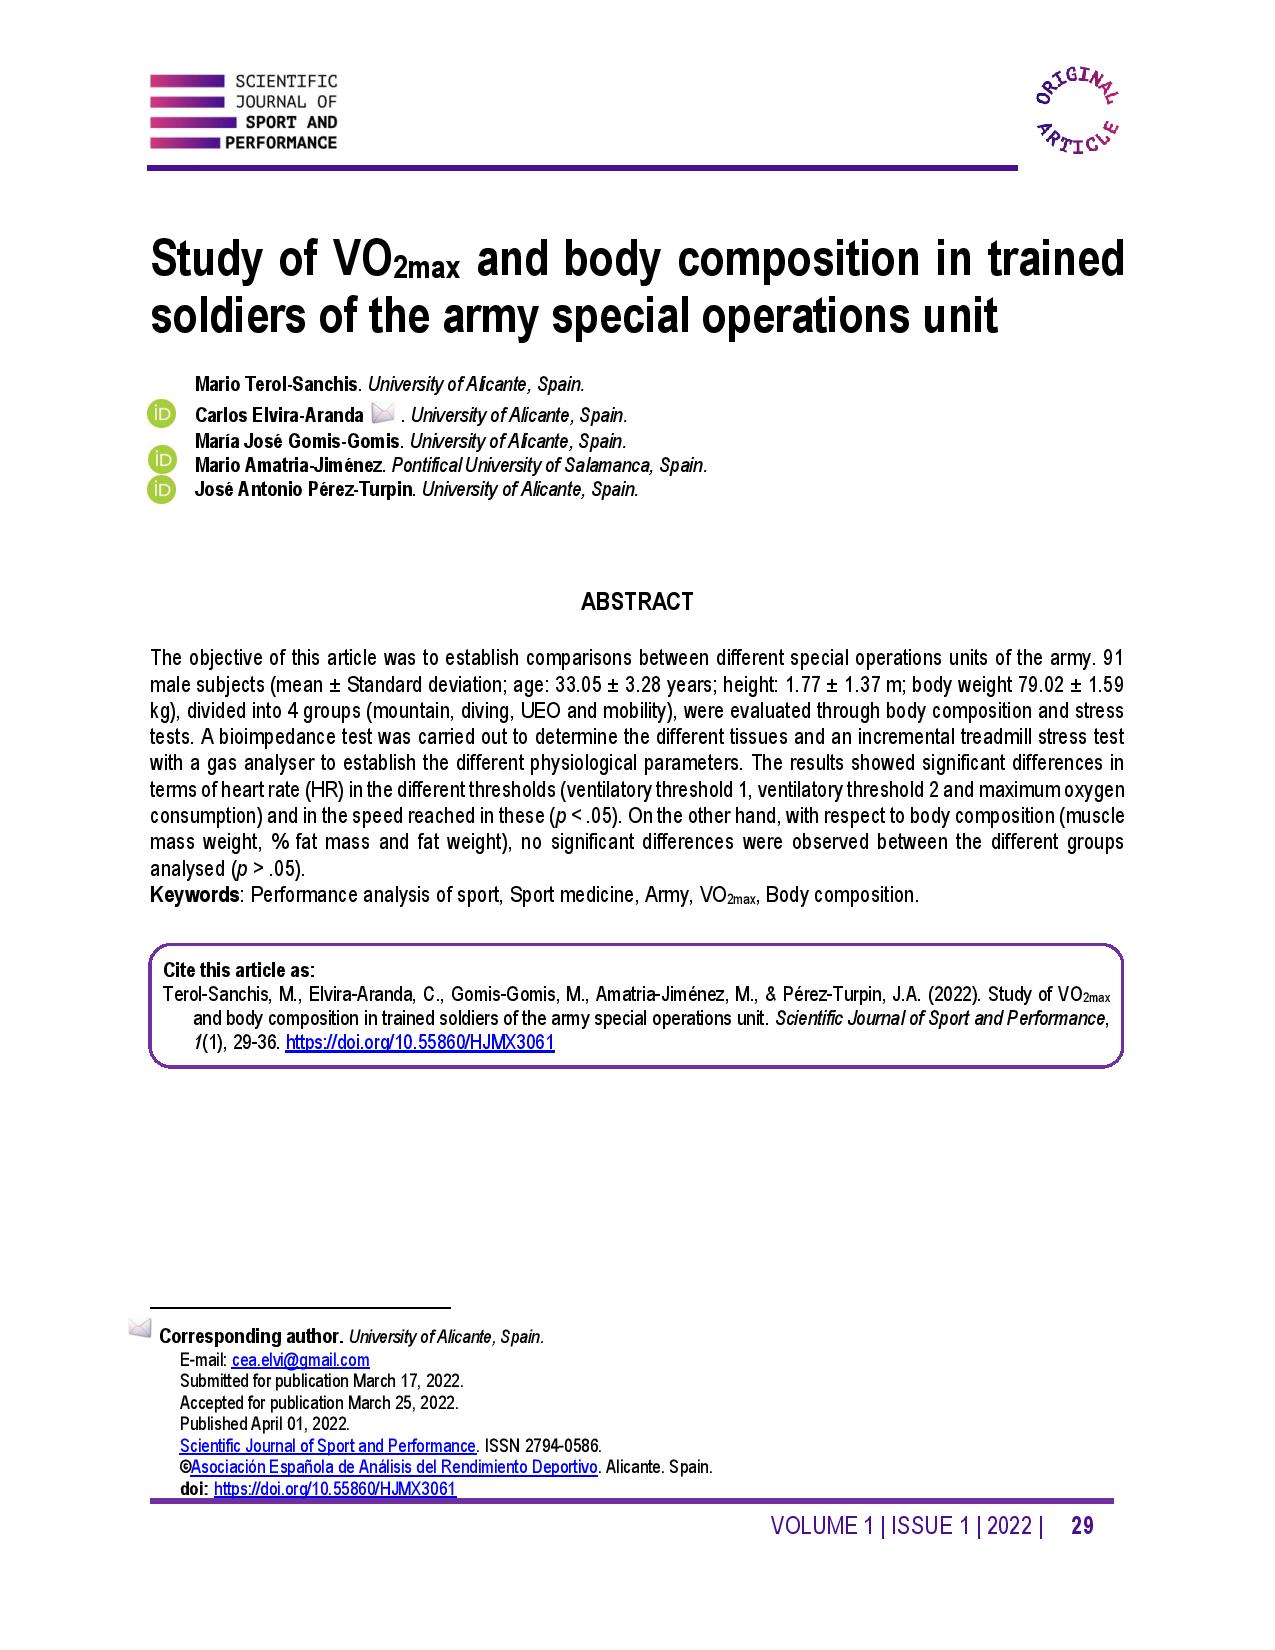 Study of VO2max and body composition in trained soldiers of the army special operations unit